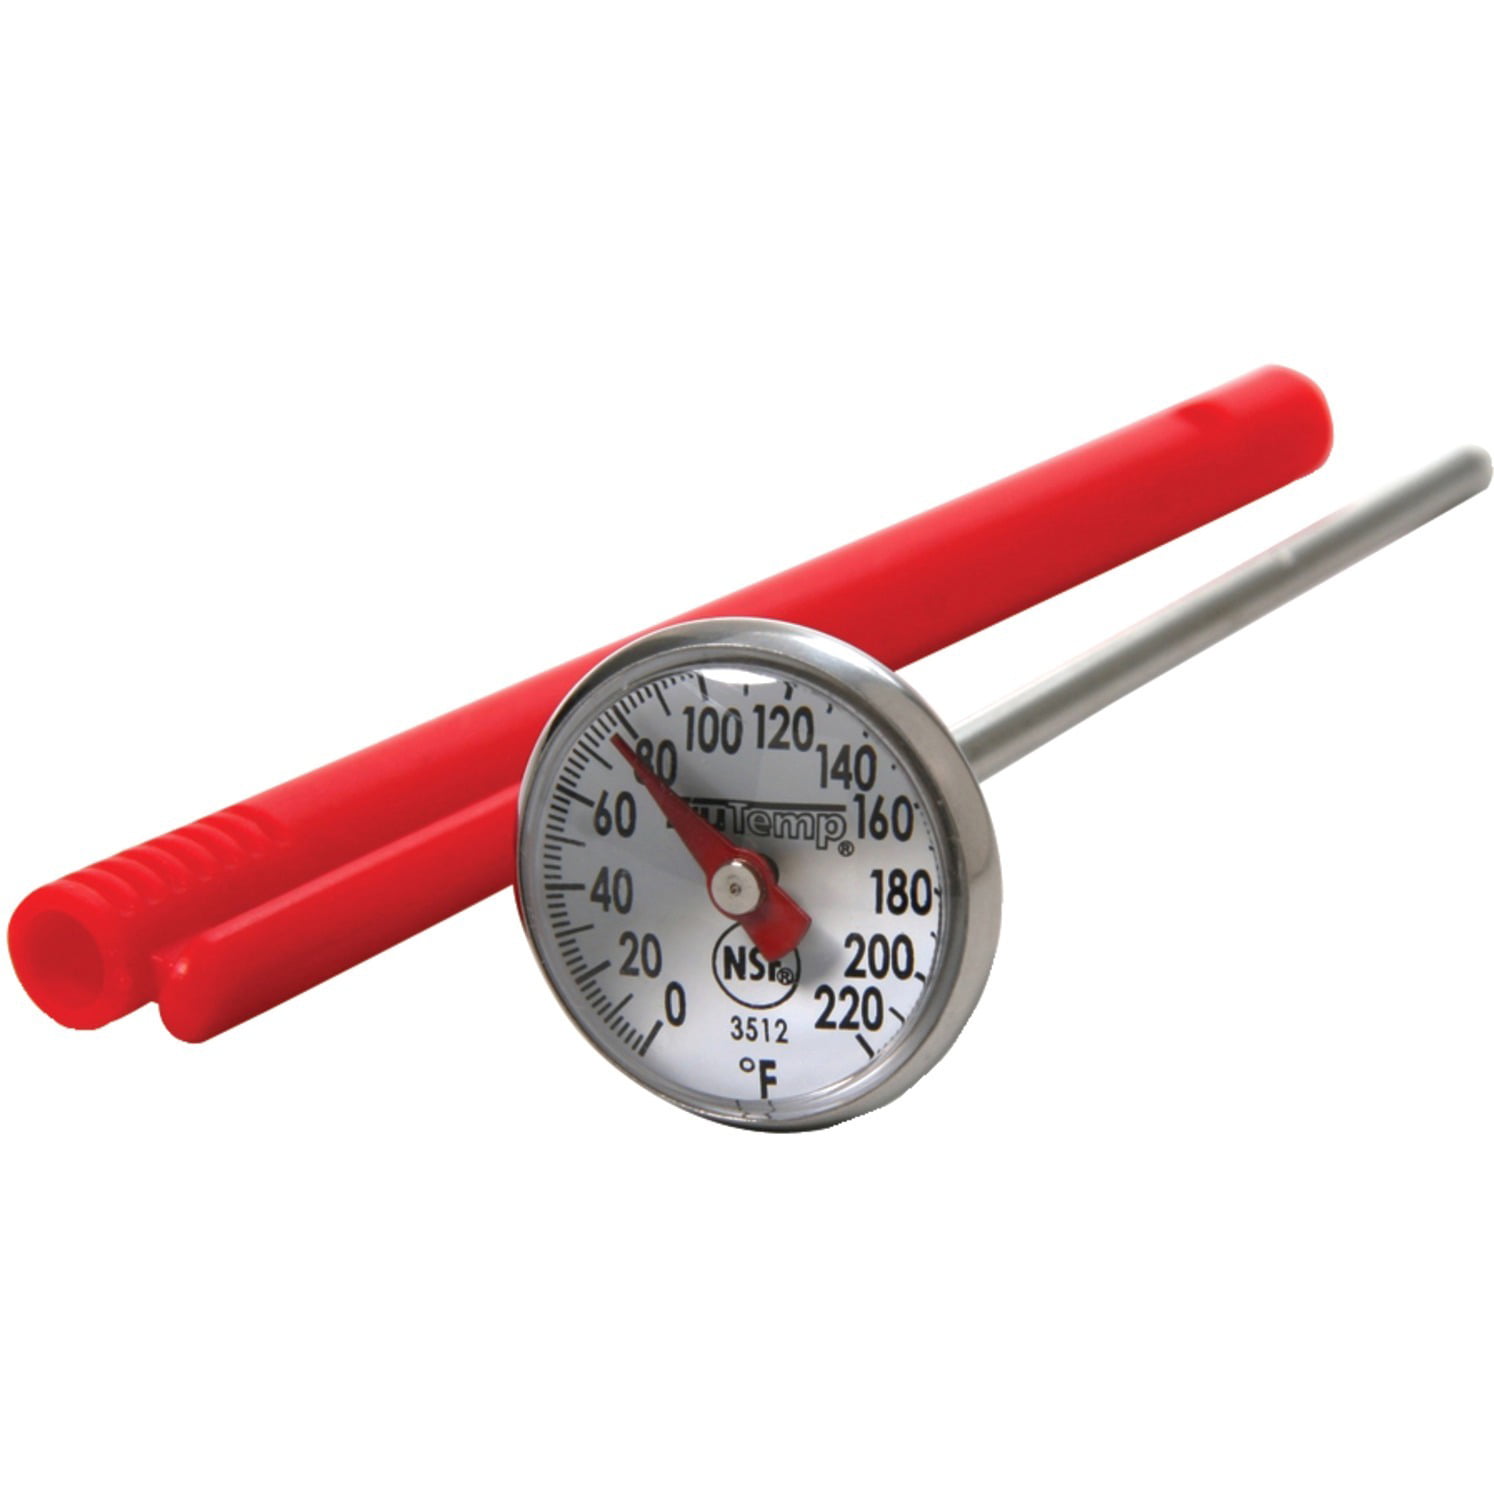 Taylor 2-in-1 Meat Thermometer Probe//24 Hour Kitchen Timer Stainless Steel//Plastic 7 x 13 x 2 cm Silver//Red